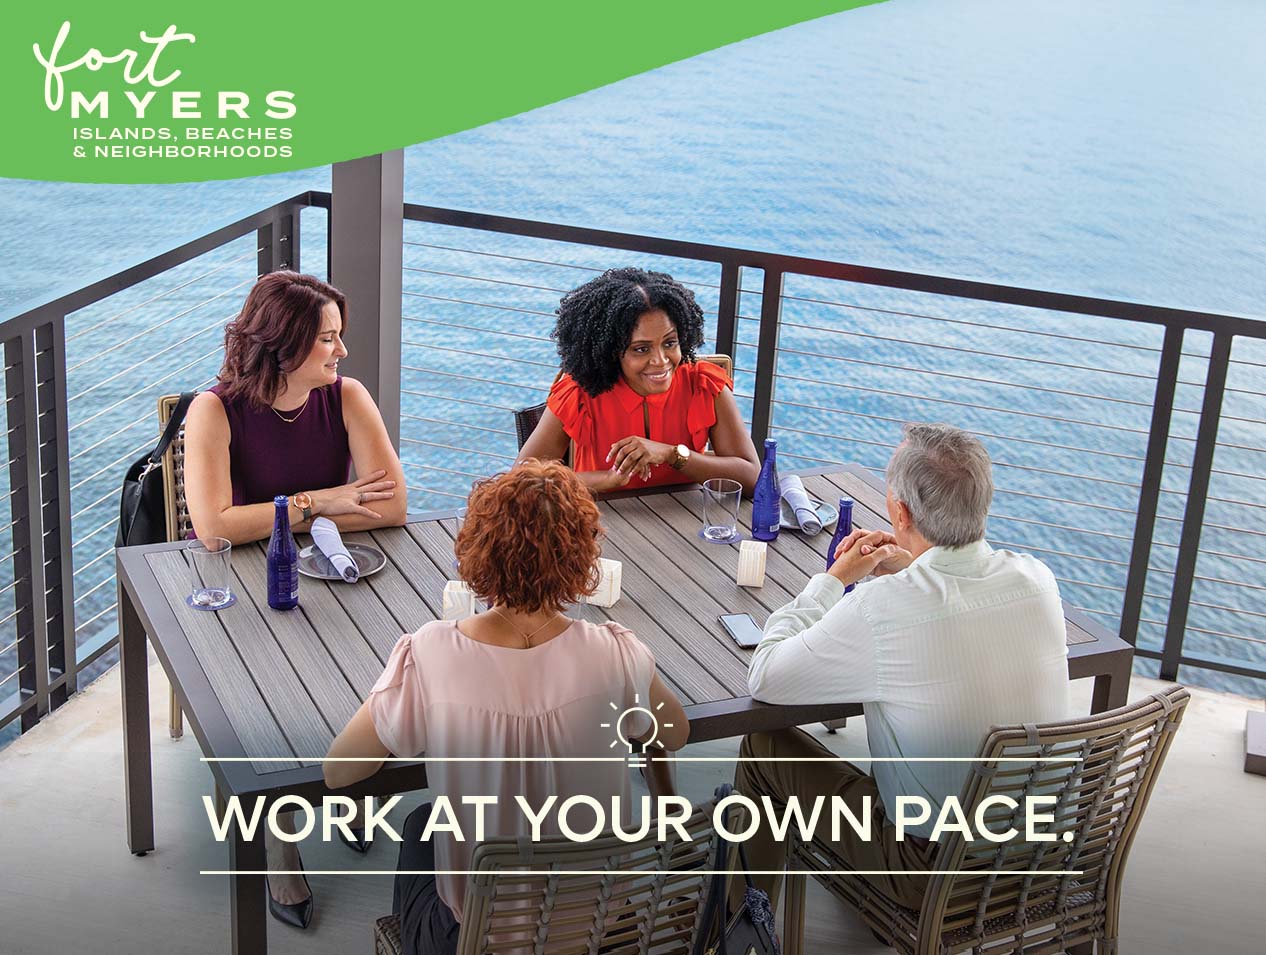 Fort Myers Islands, Beaches & Neighborhoods - Work at Your Own Pace.